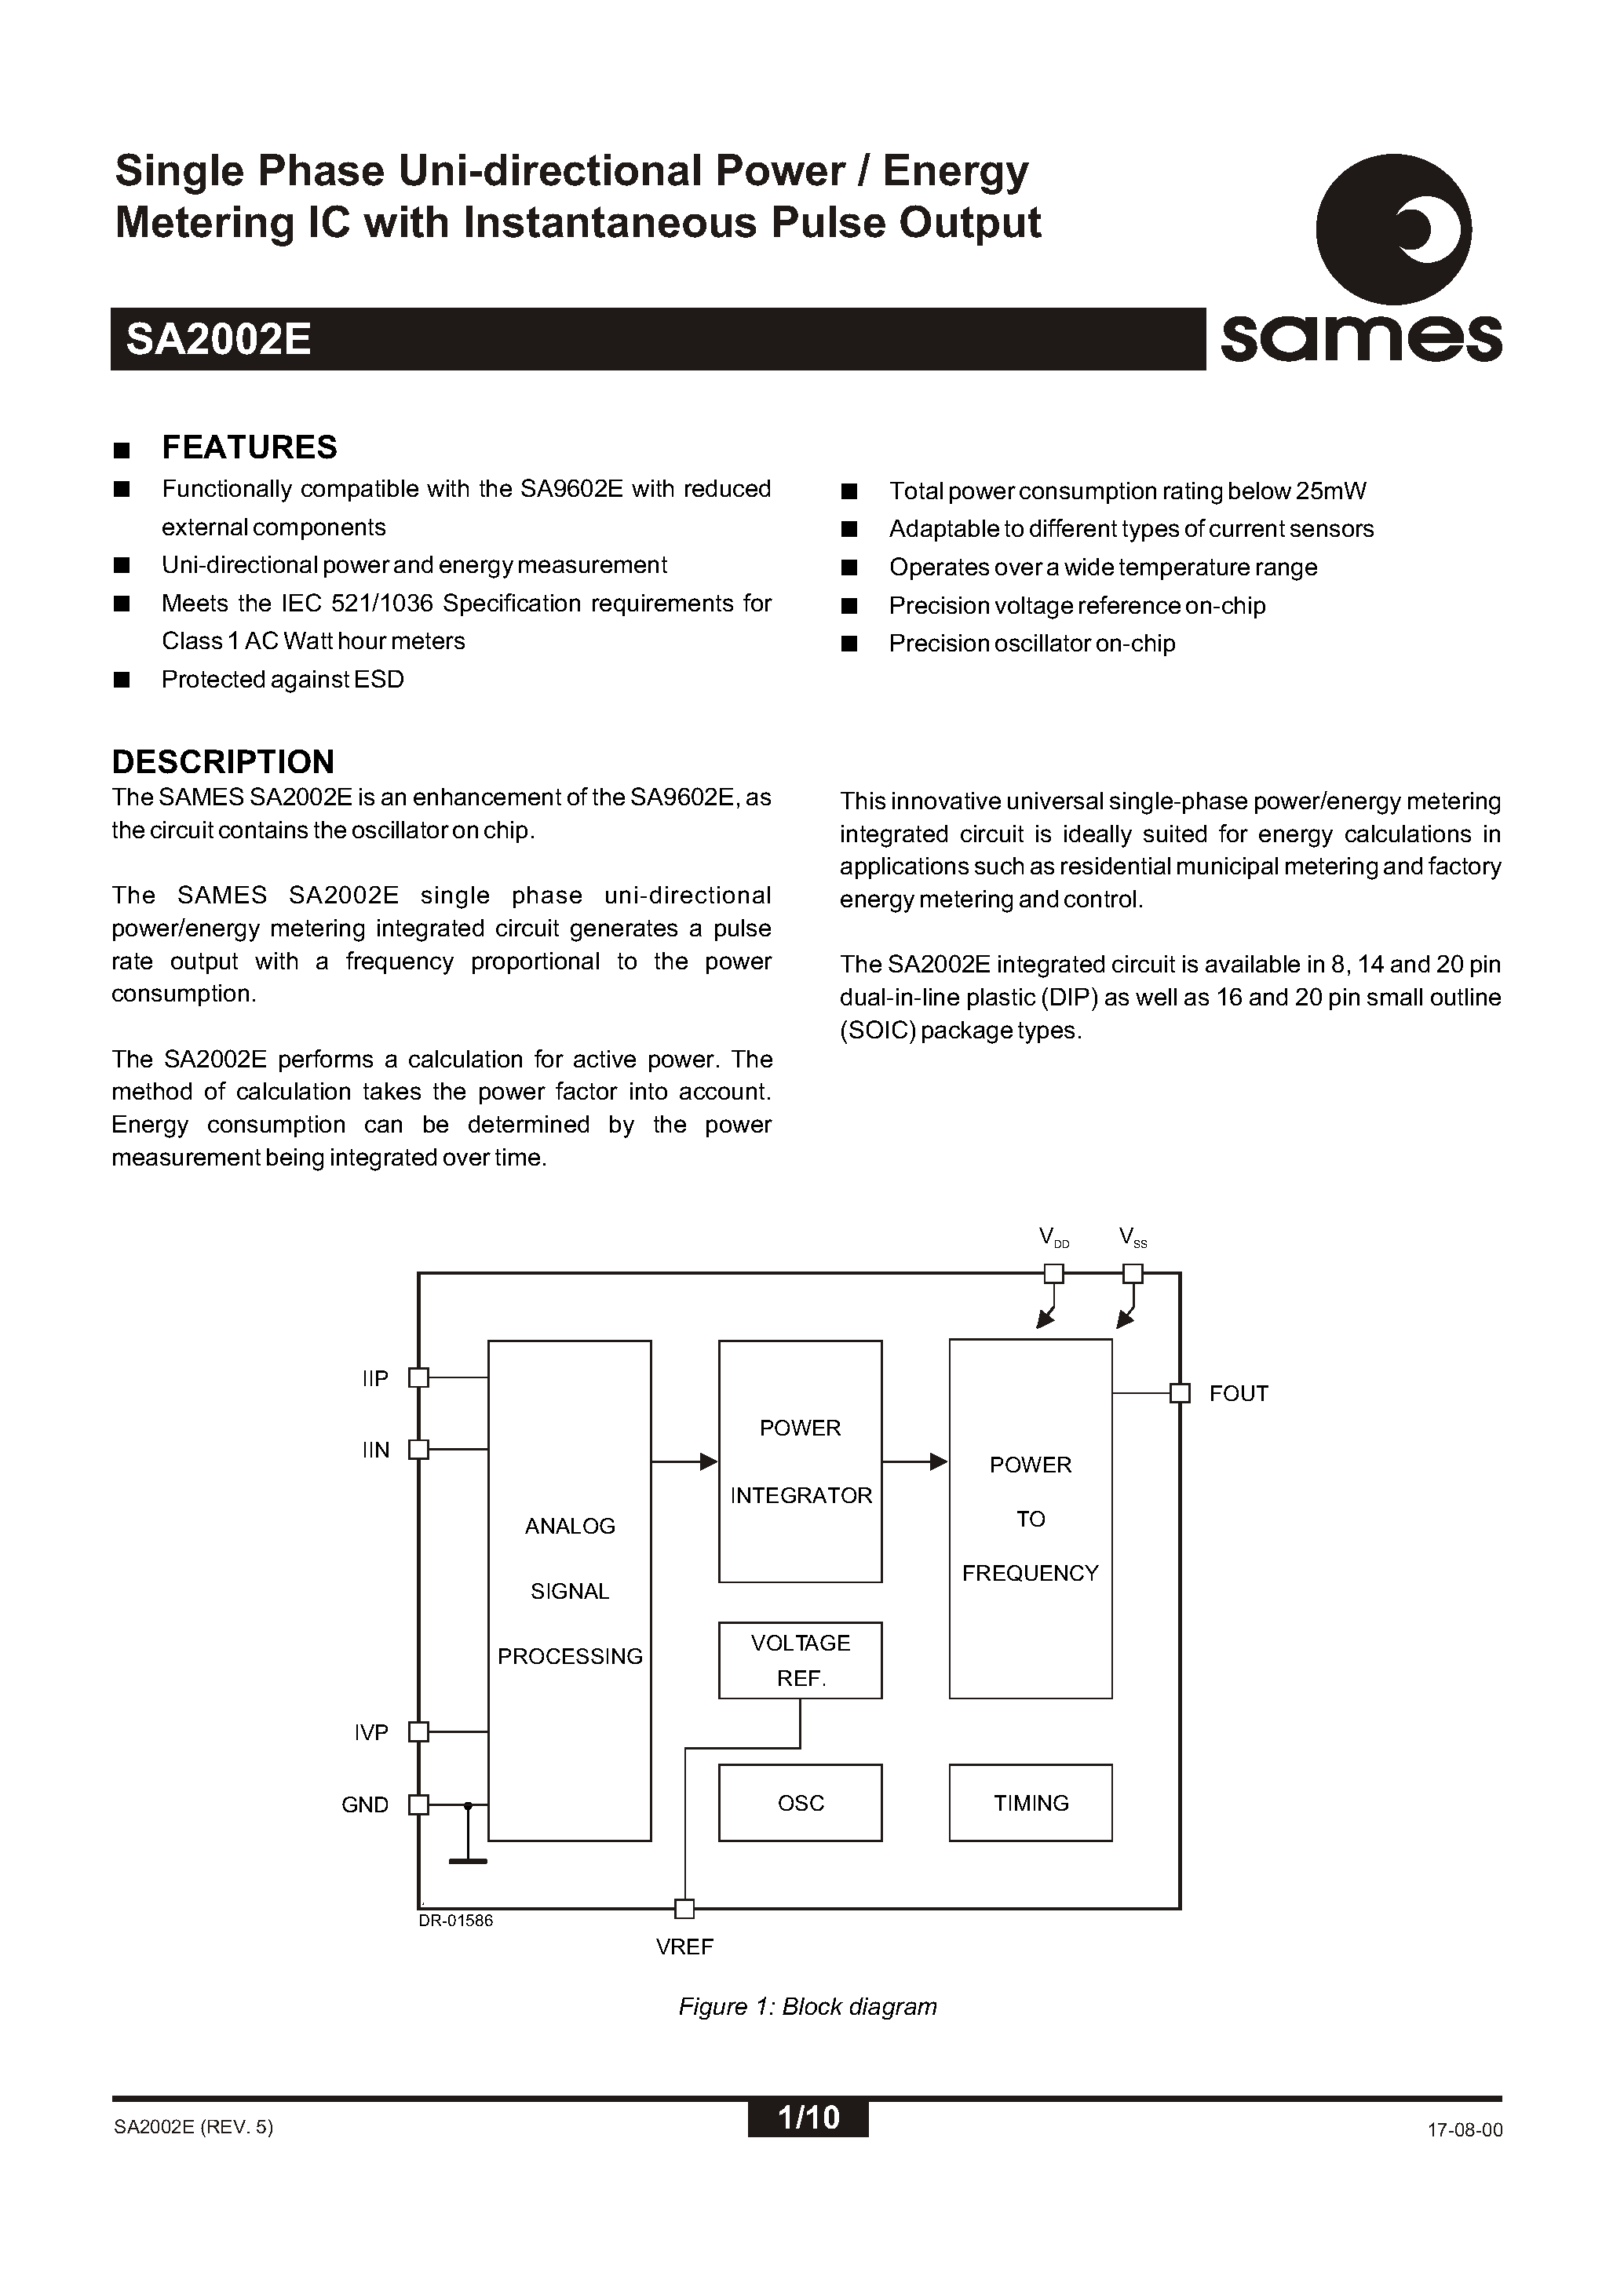 Datasheet SA2002ESA - Single Phase Uni-directional Power / Energy Metering IC with Instantaneous Pulse Output page 1